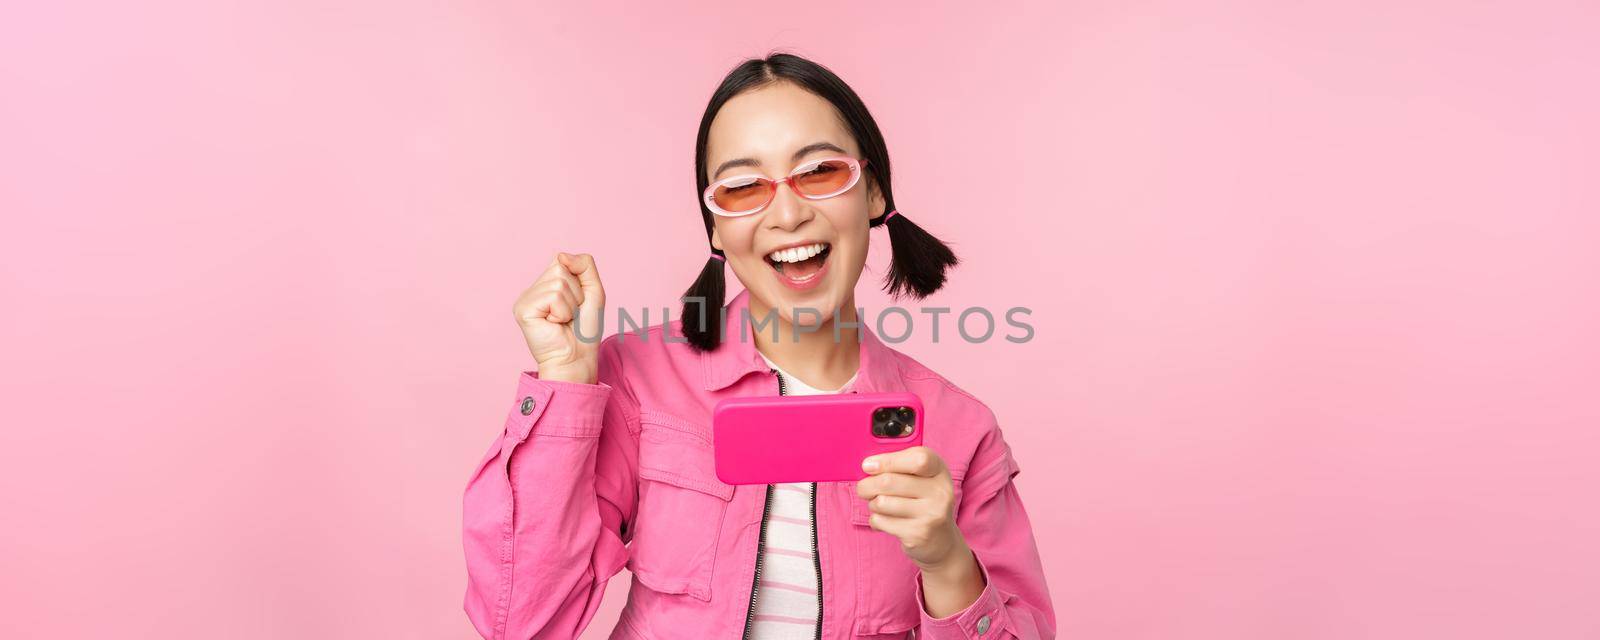 Happy smiling korean girl winning on mobile phone, looking at horizontal smartphone screen and rejoicing, achieve goal, celebrating, standing over pink background.